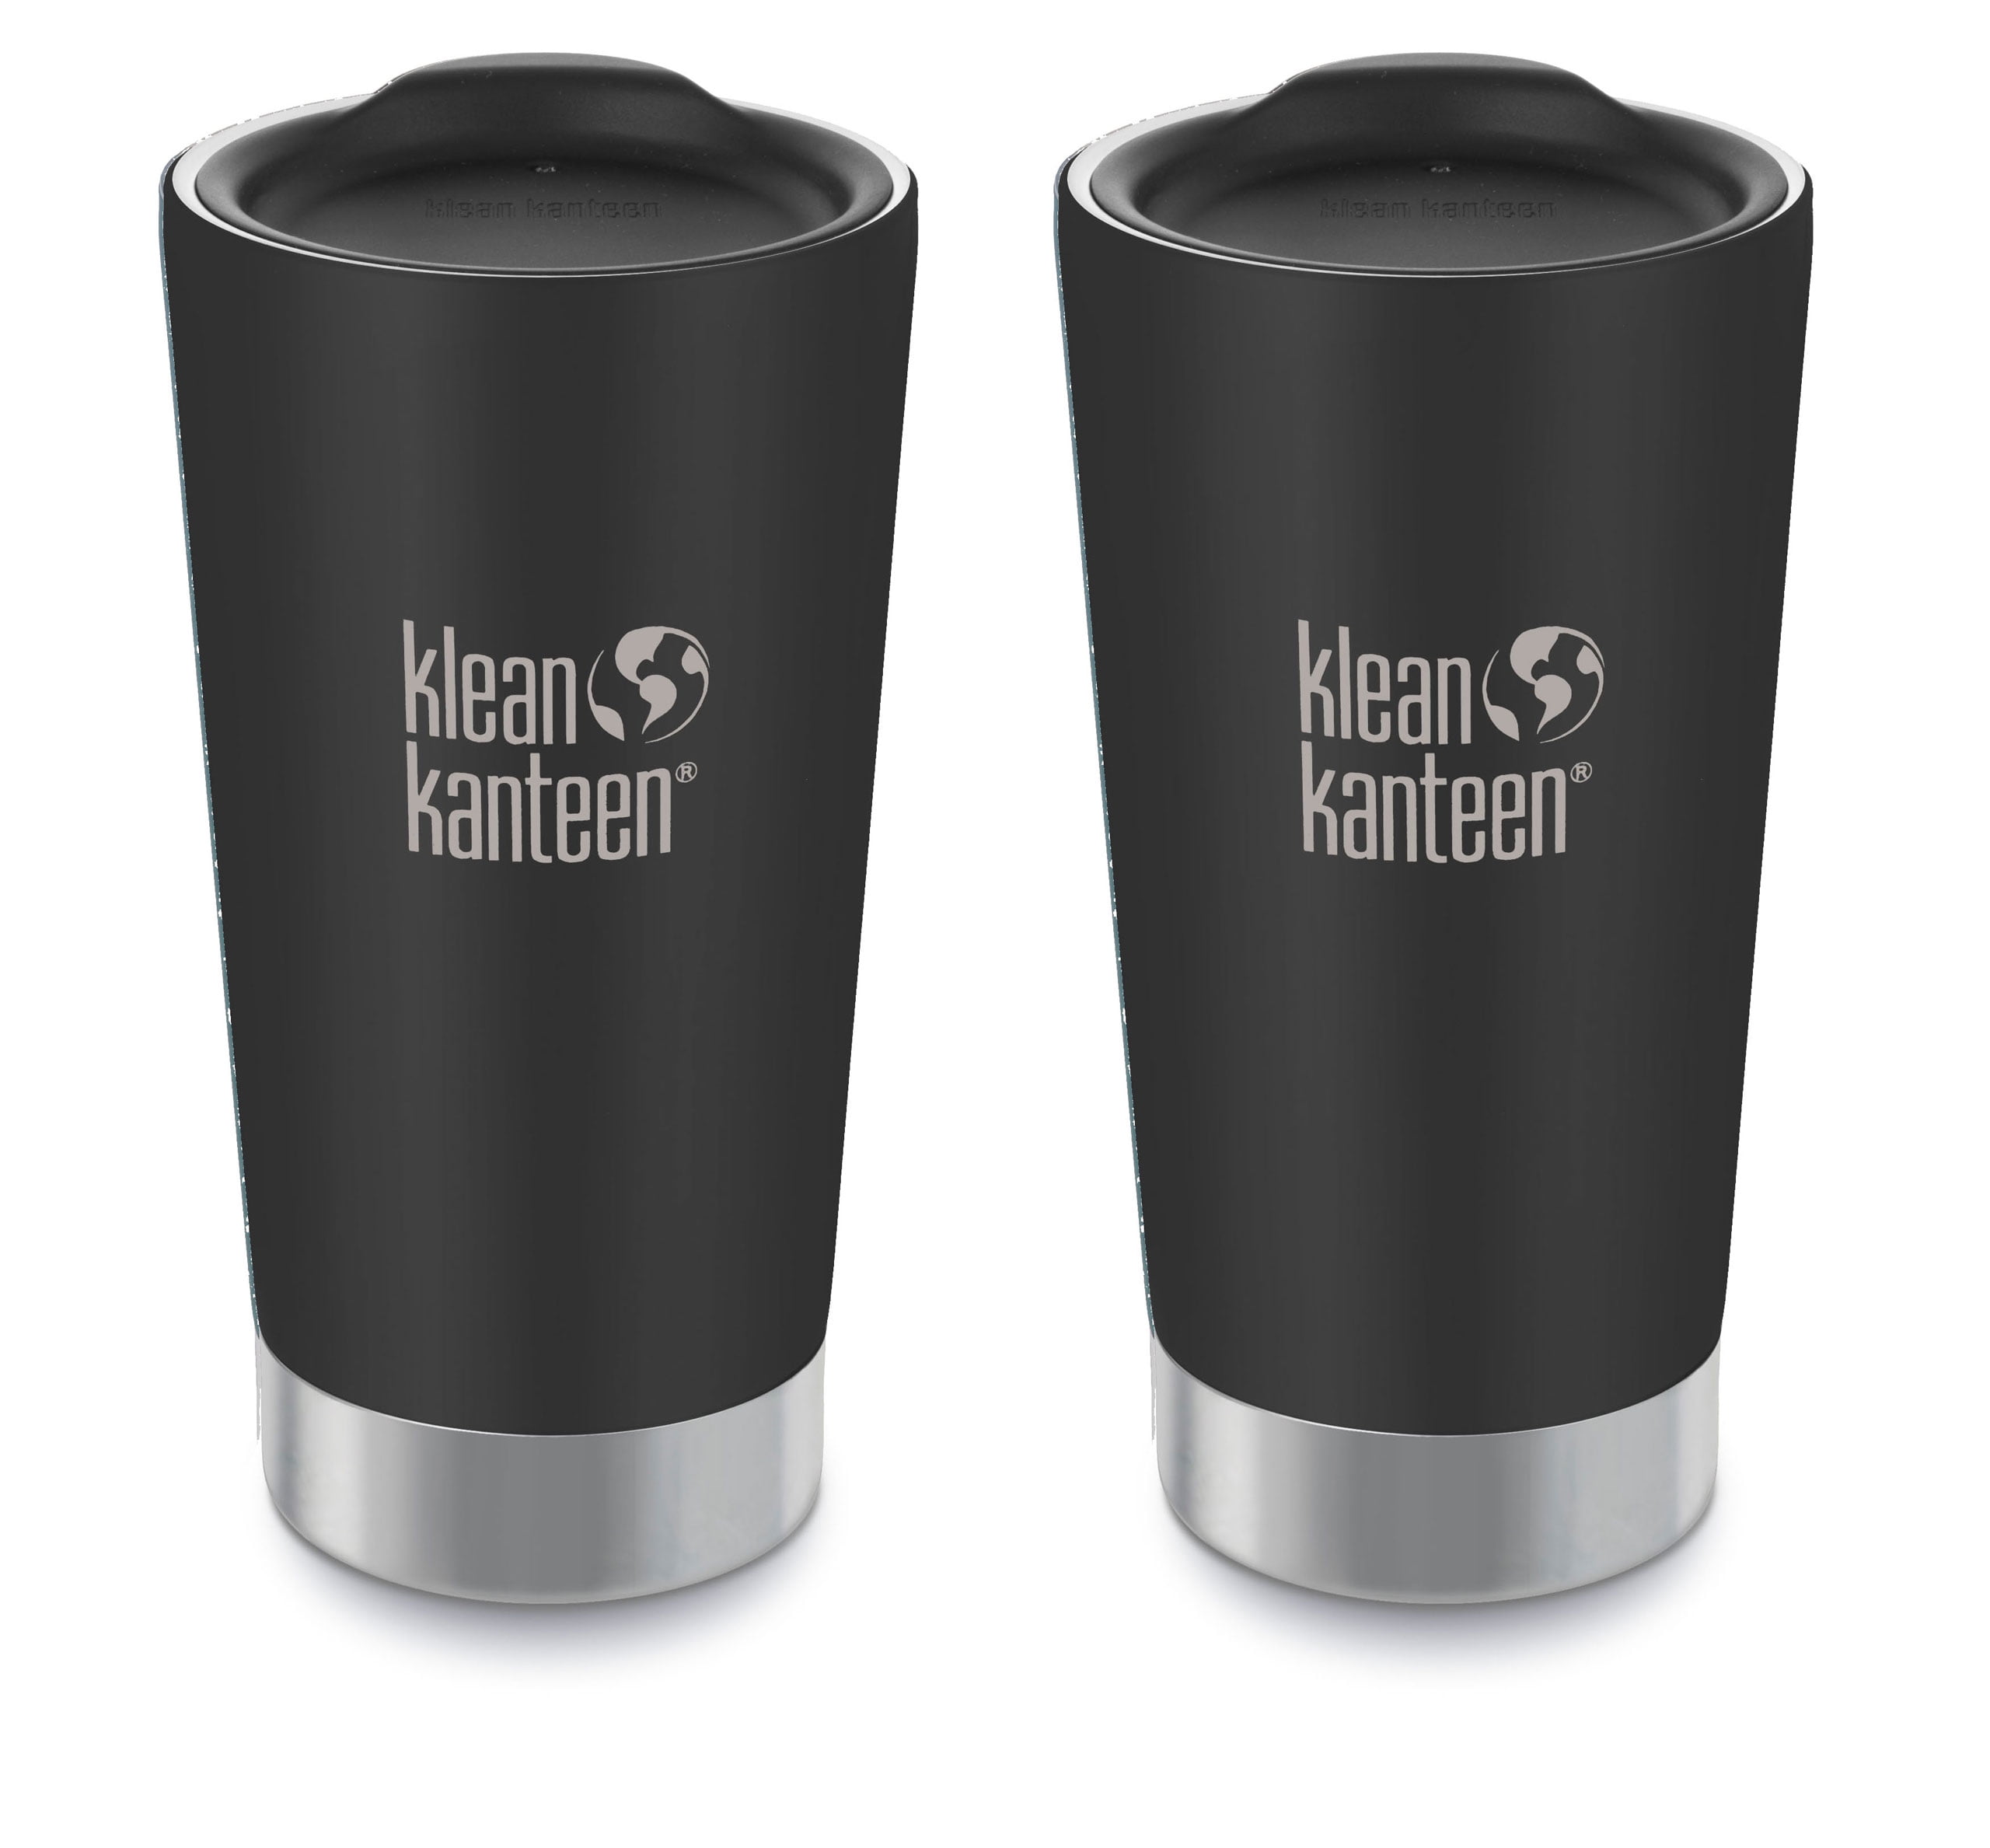 Klean Kanteen 296ml Stainless Steel Cups Army Camping Festival Travel Mug 4-Pack 